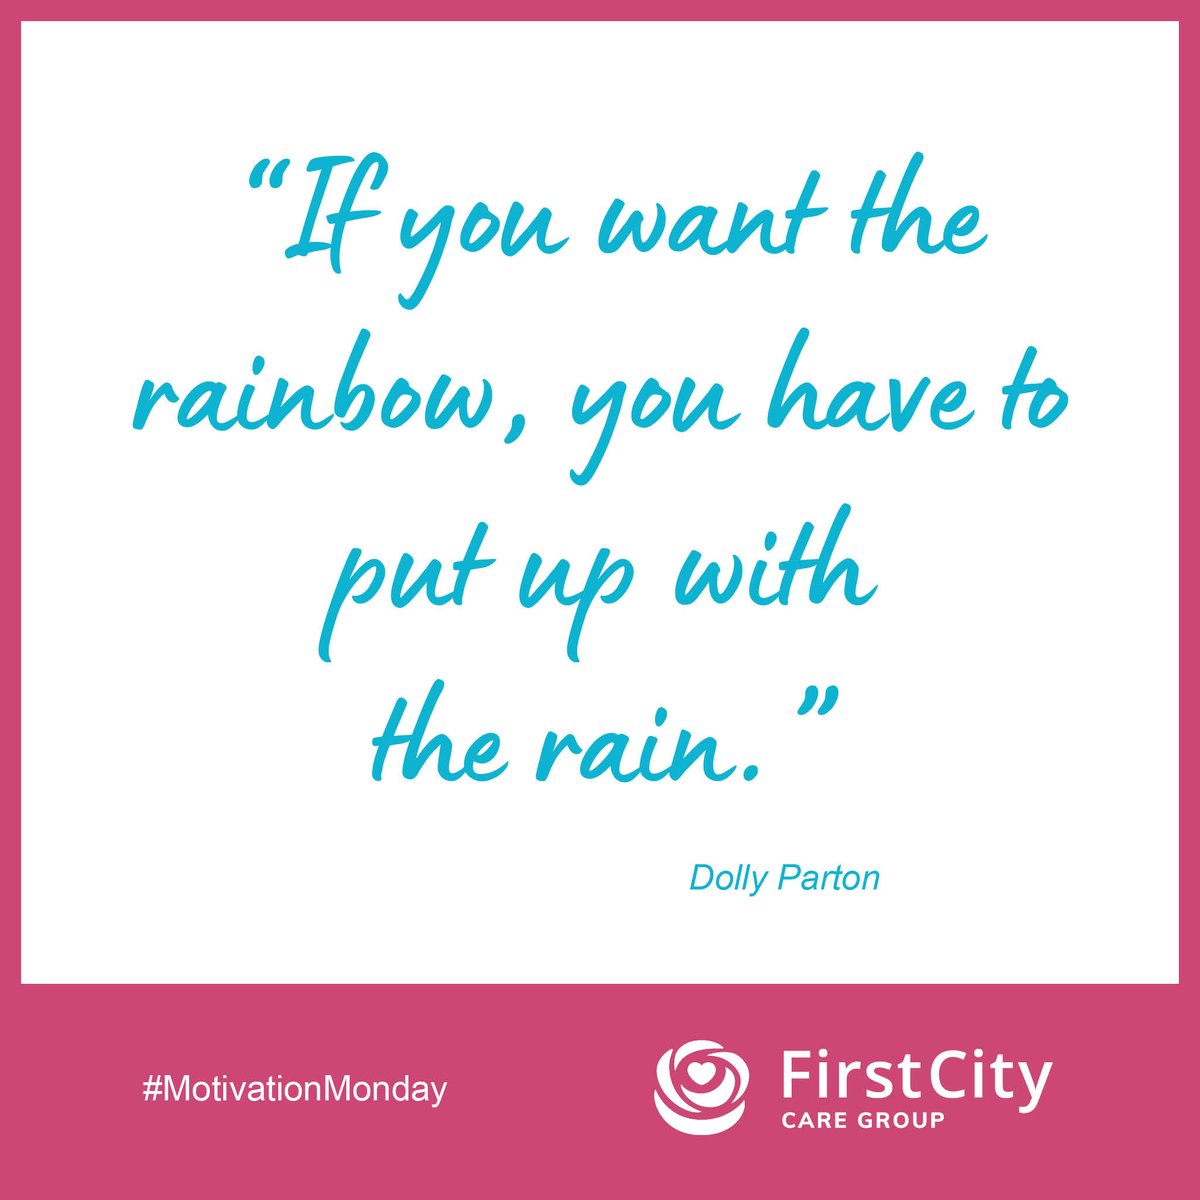 “If you want the rainbow, you have to put up with the rain.” 

#motivationmonday #motivationquotes #inspirationalwords